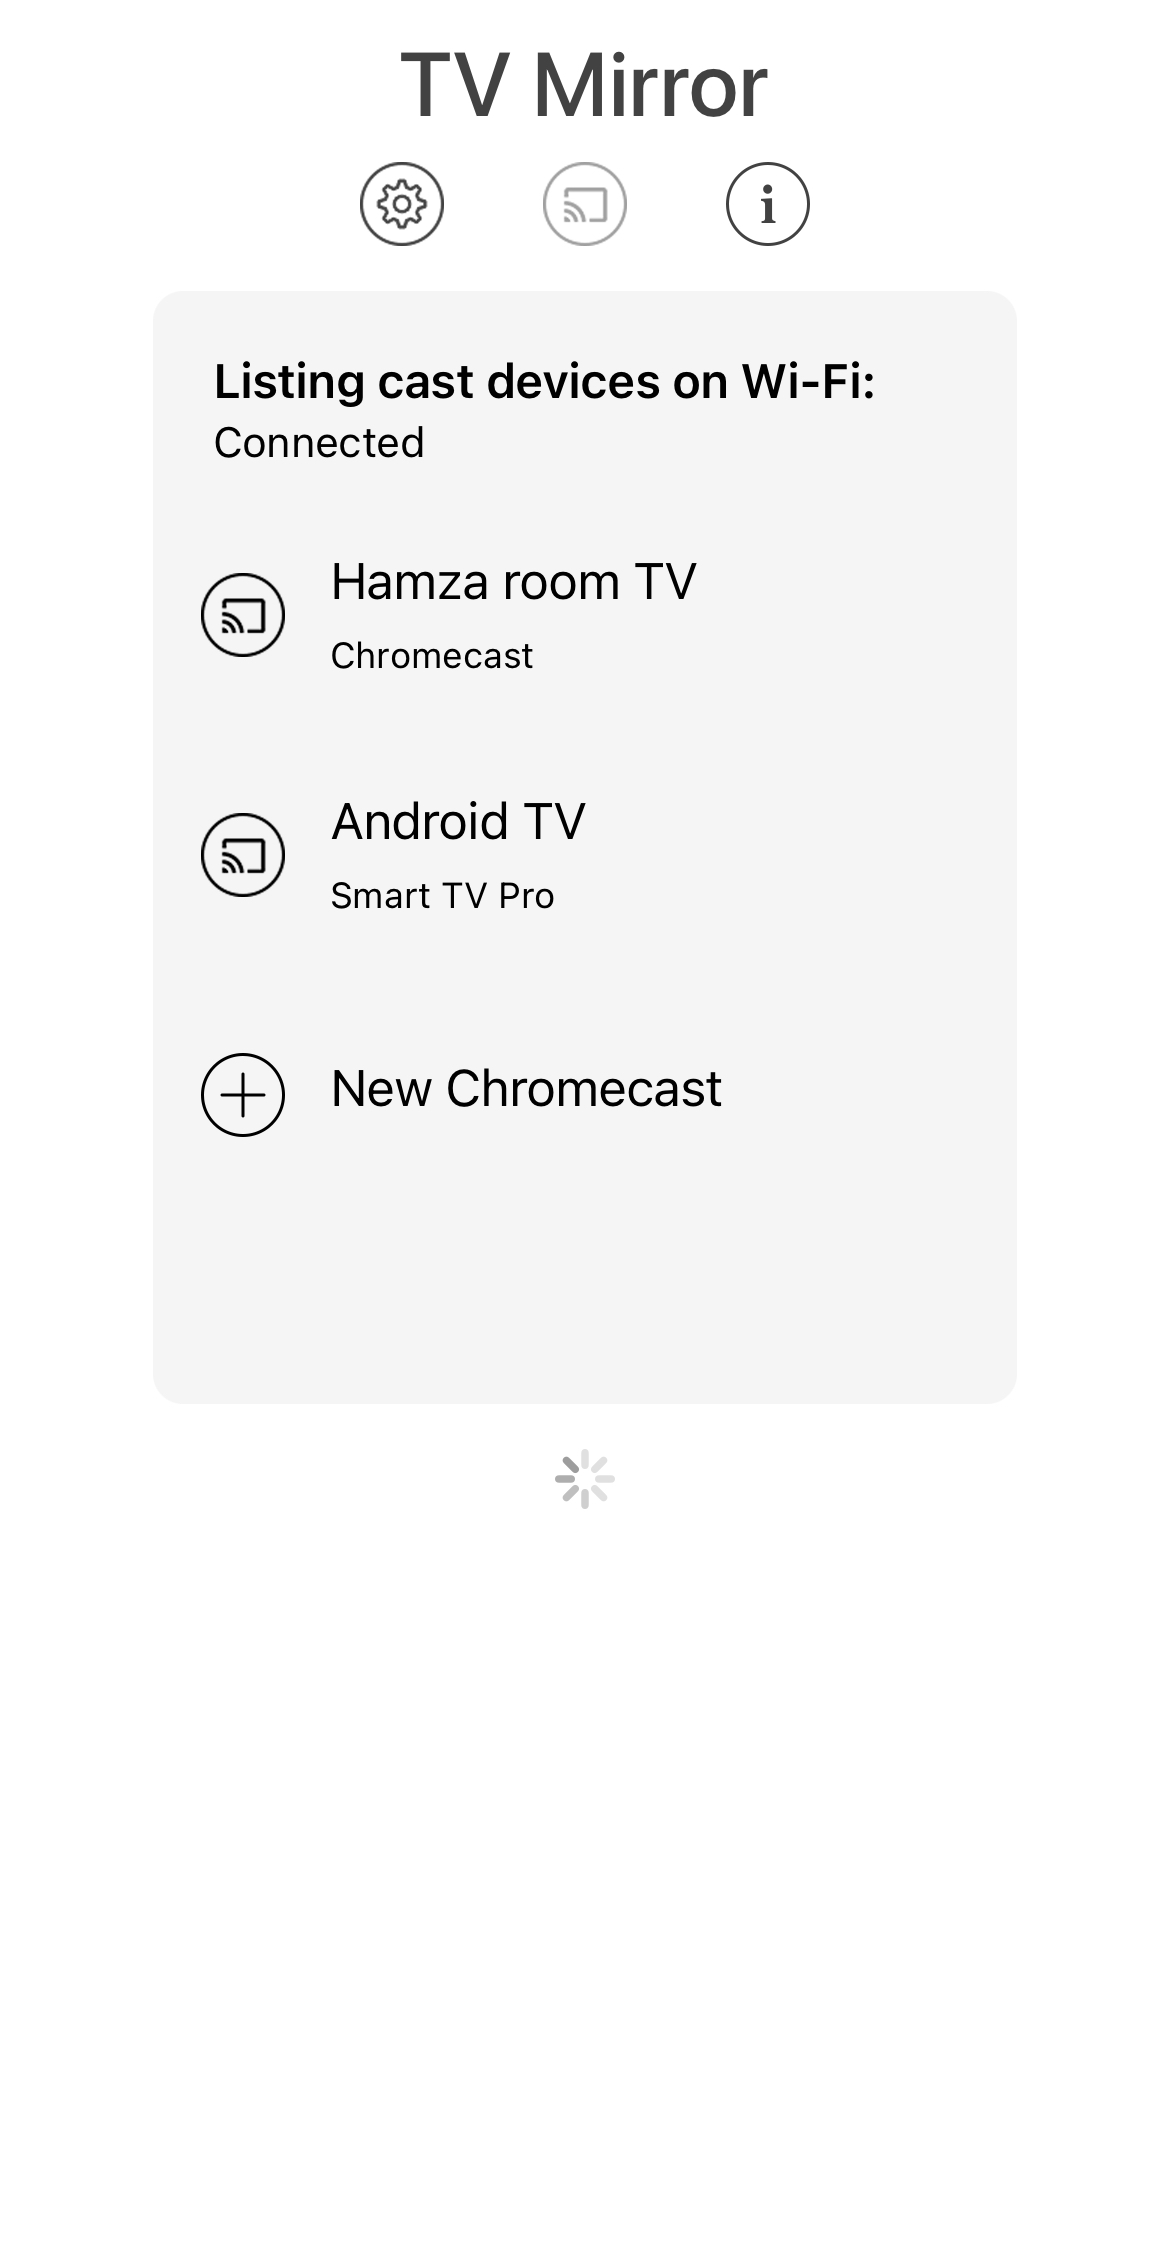 Connecting to a Chromecast device in a TV Mirror+